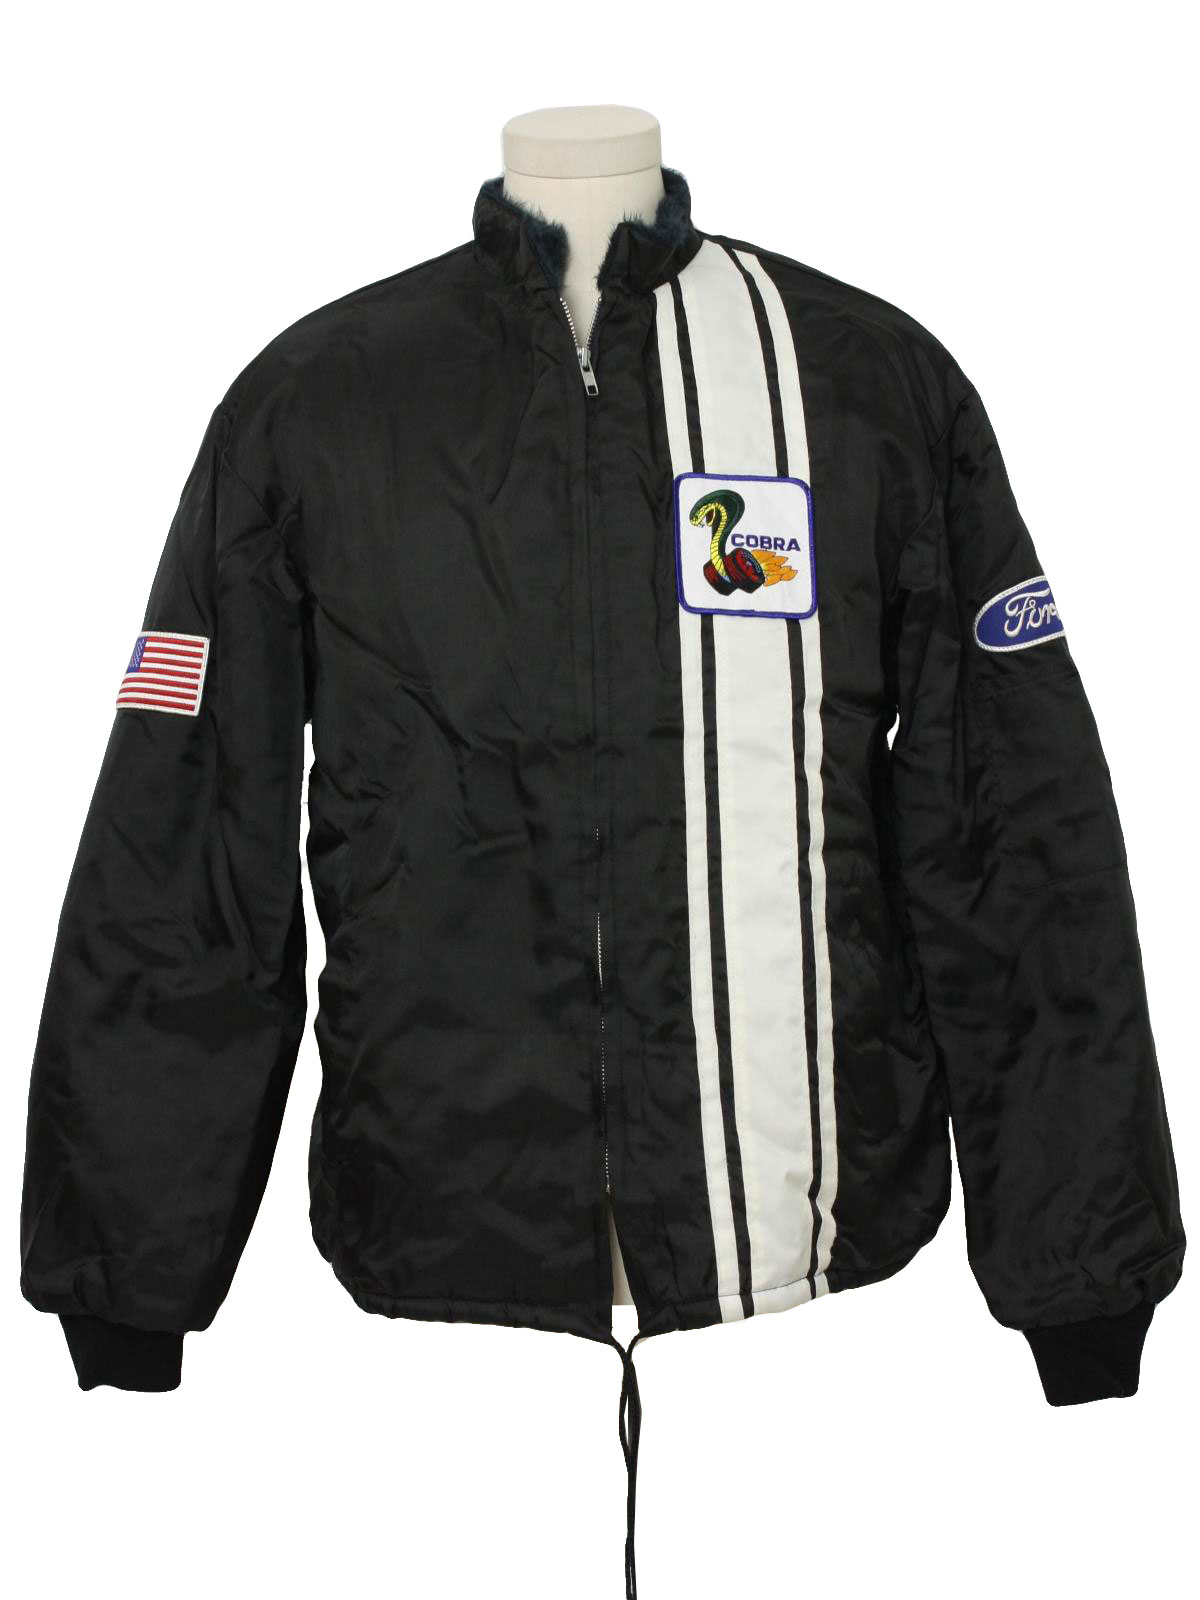 Ford racing jacket with cobra logo on it #6